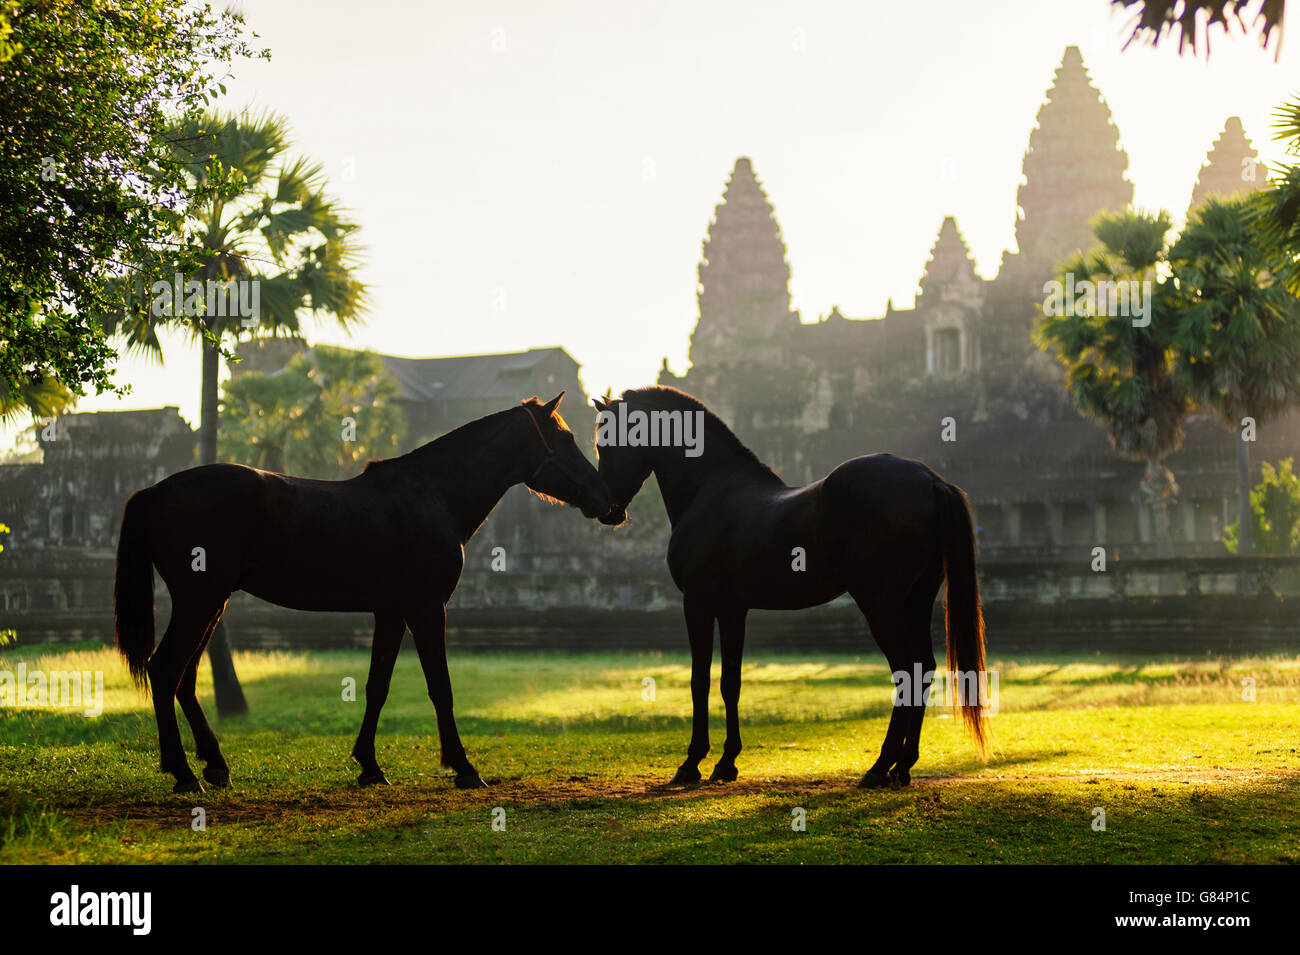 Two horses standing in front of Angkor Wat, Siem Riep, Cambodia Stock Photo